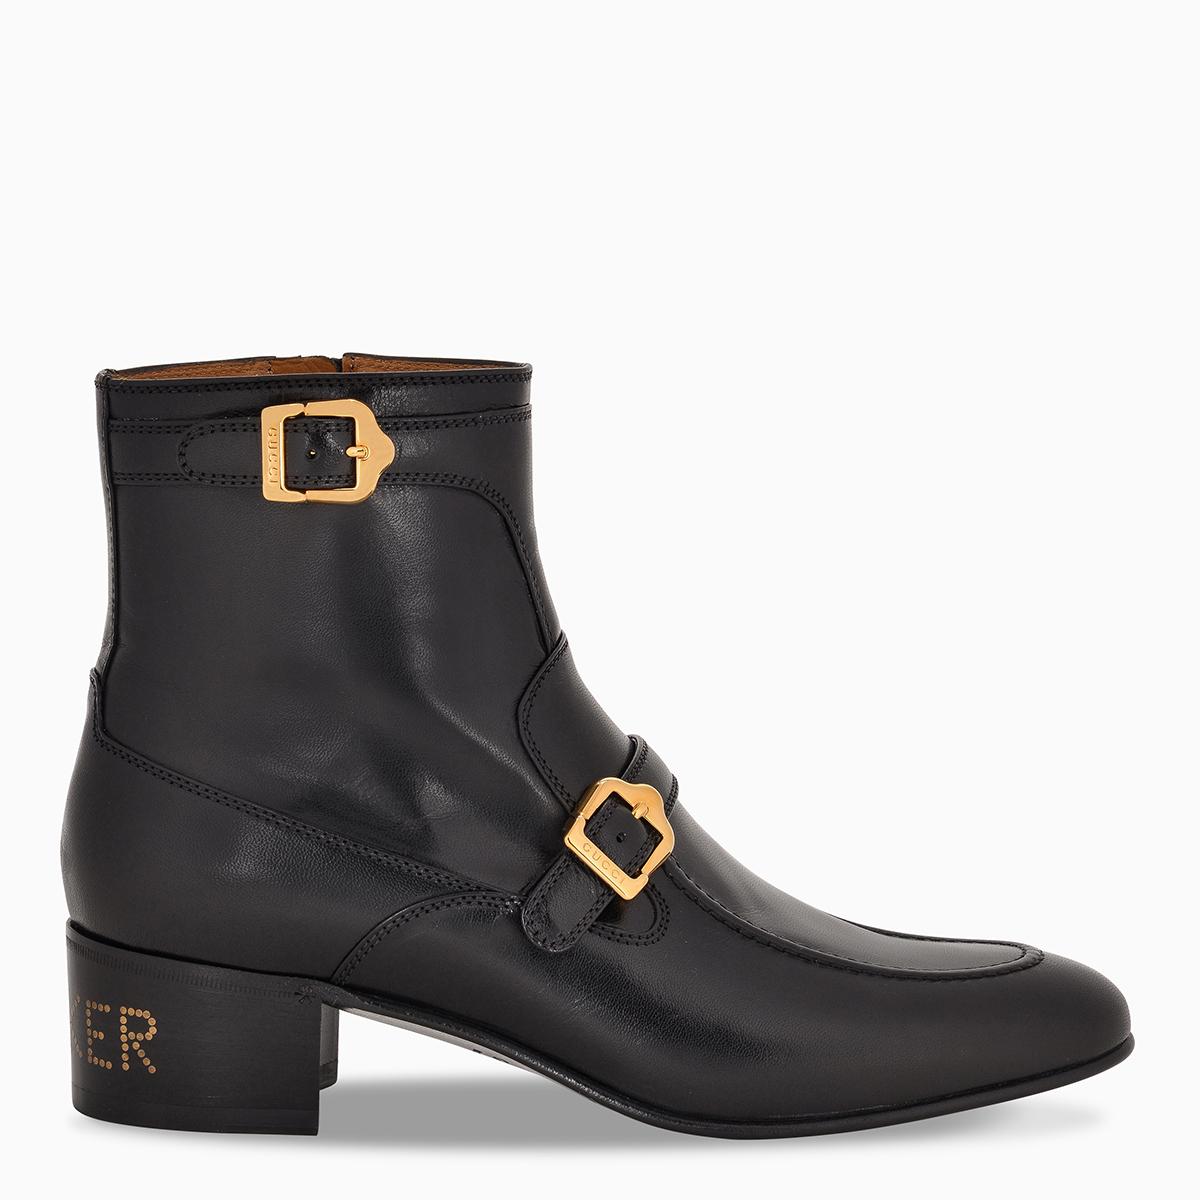 Gucci Leather Ebal Buckle Boots in Nero (Black) for Men - Save 47% - Lyst